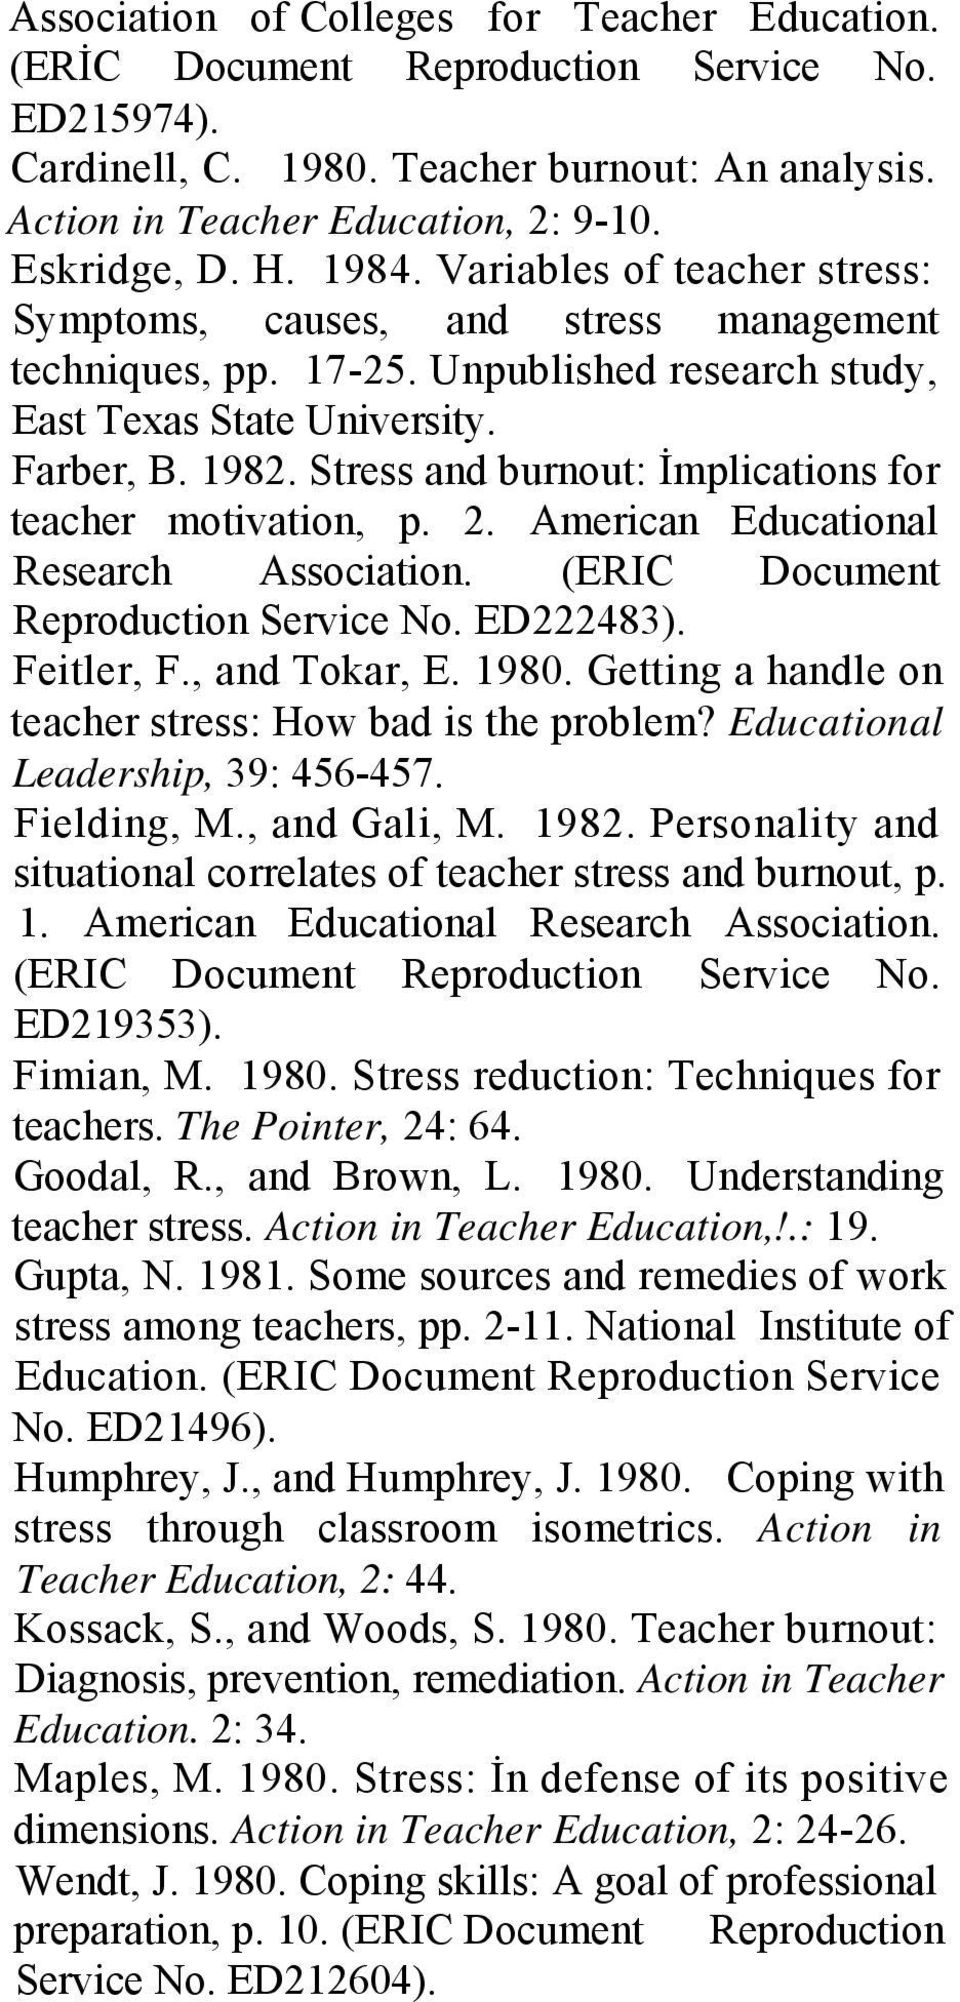 Stress and burnout: İmplications for teacher motivation, p. 2. American Educational Research Association. (ERIC Document Reproduction Service No. ED222483). Feitler, F., and Tokar, E. 1980.